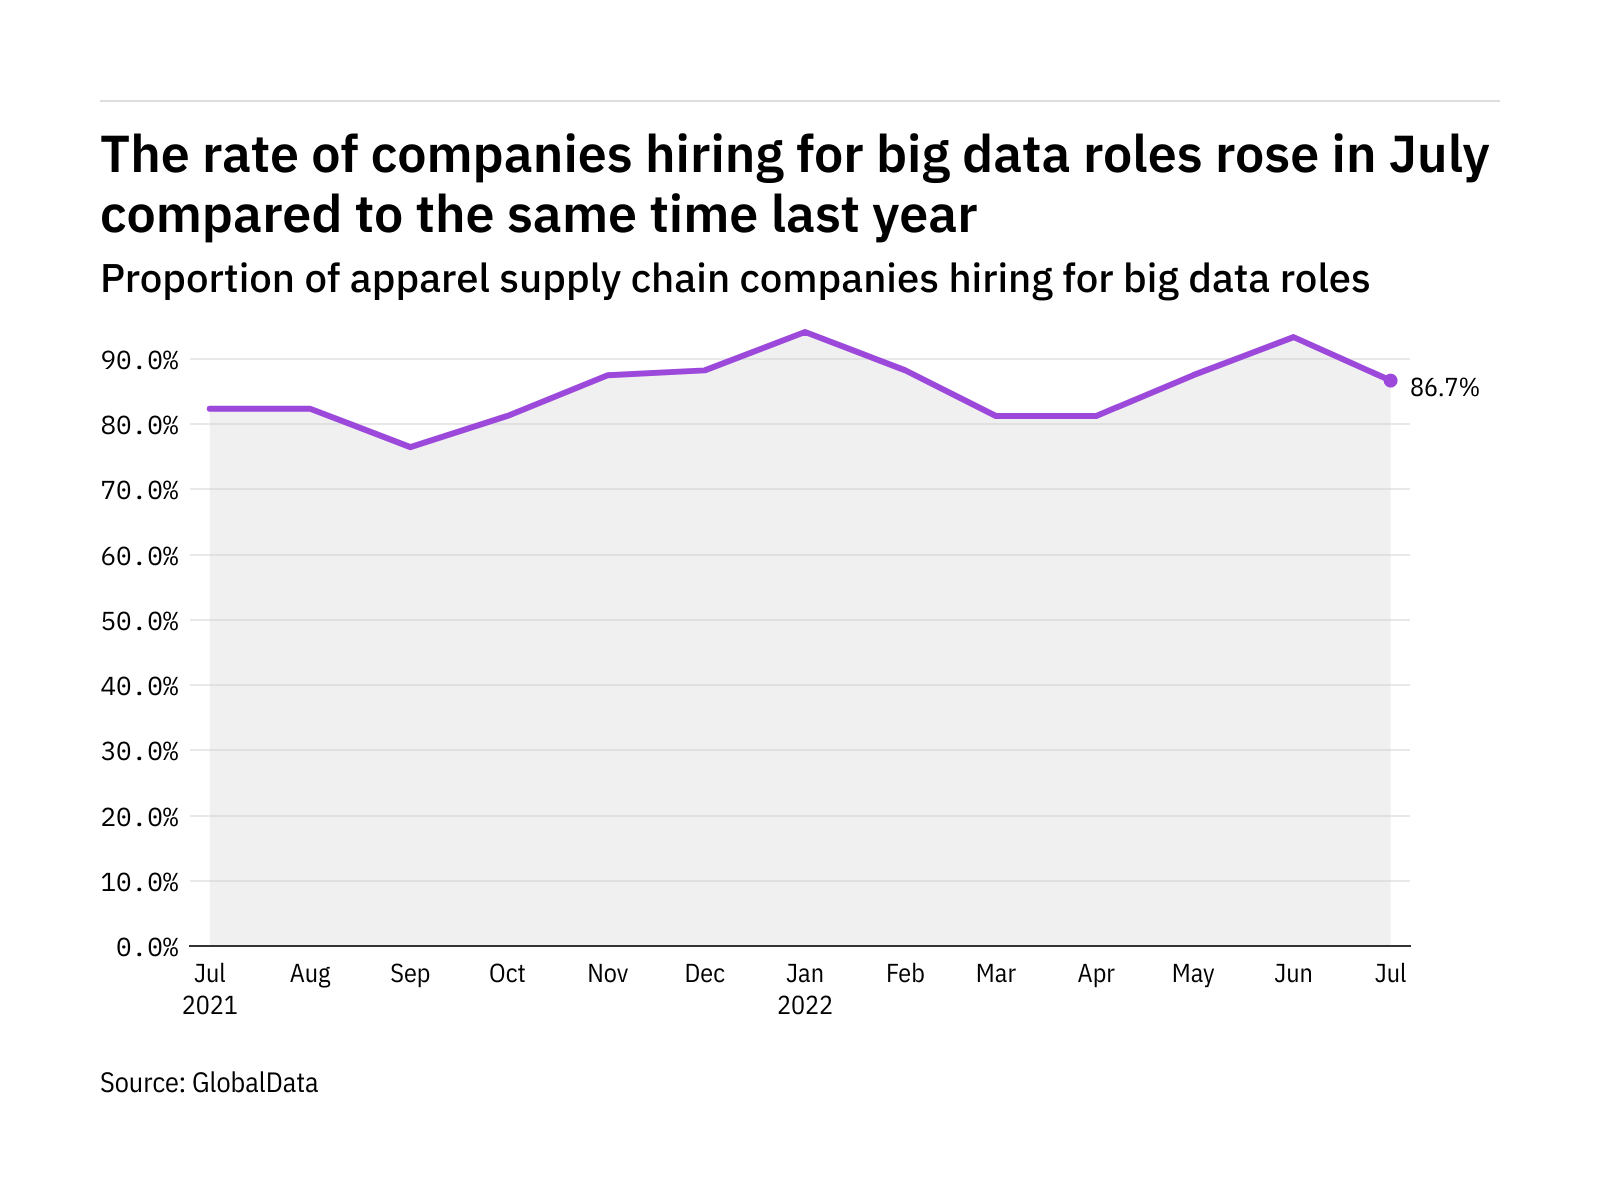 Big data hiring levels in the apparel industry rose in July